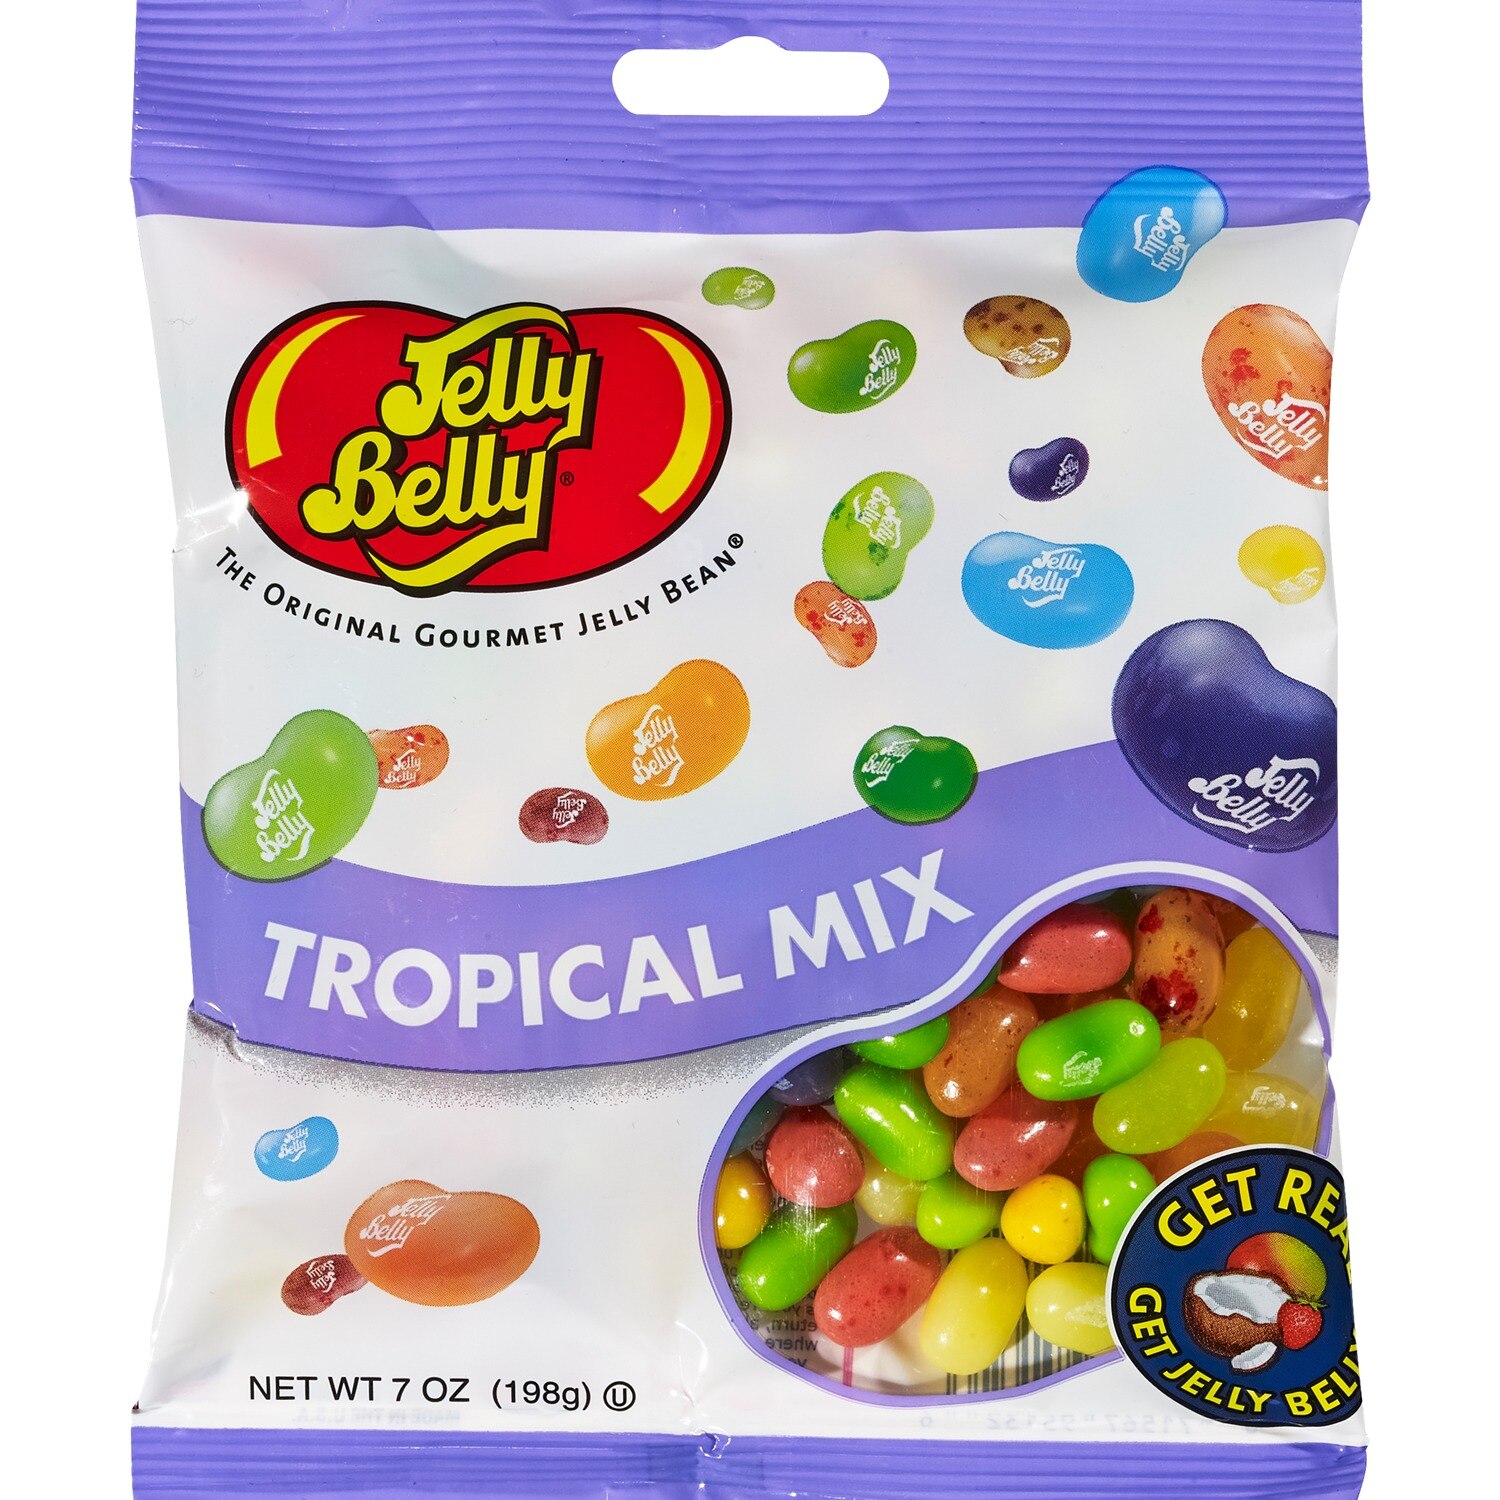 Jelly Belly - Caramelos masticables gourmet, Tropical Mix